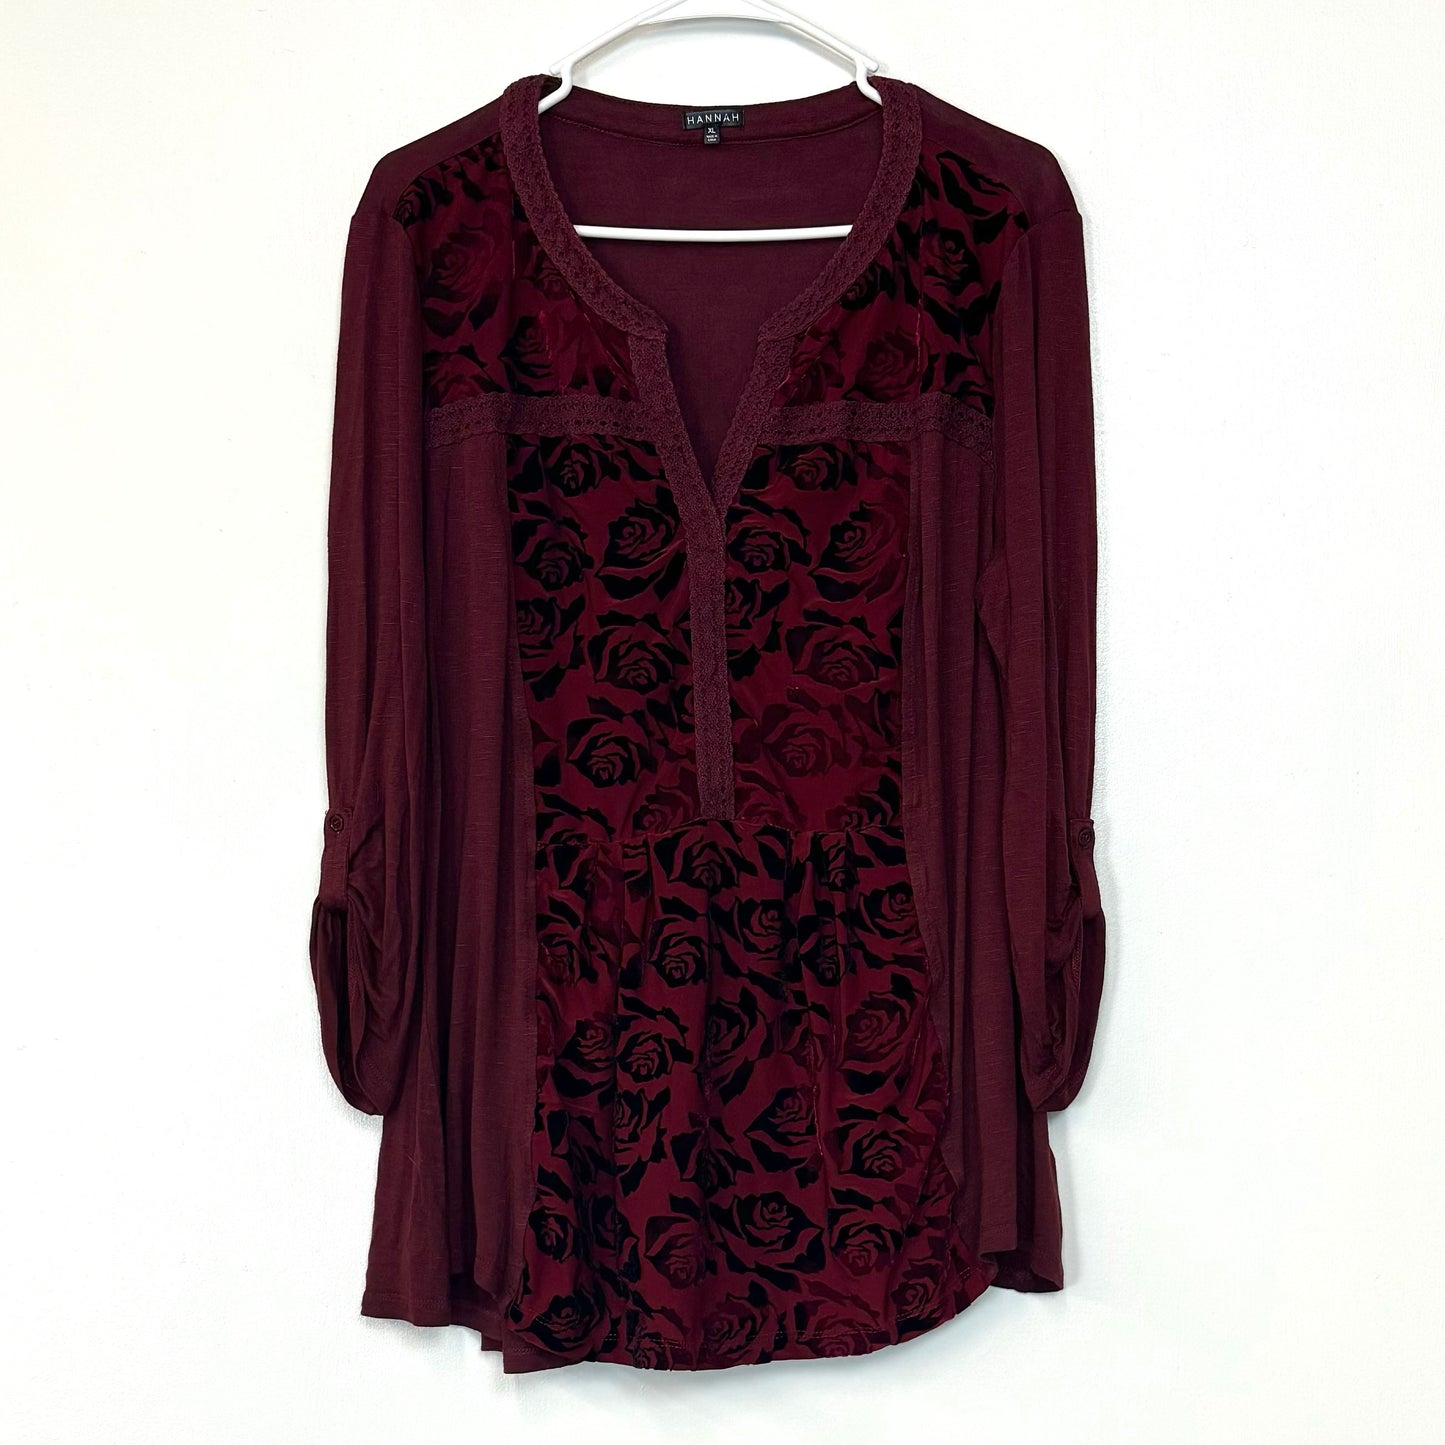 Hannah | Tunic Top Iridescent Floral Rose Velvet Embroidered Blouse | Color: Red | Size: XL | Pre-Owned